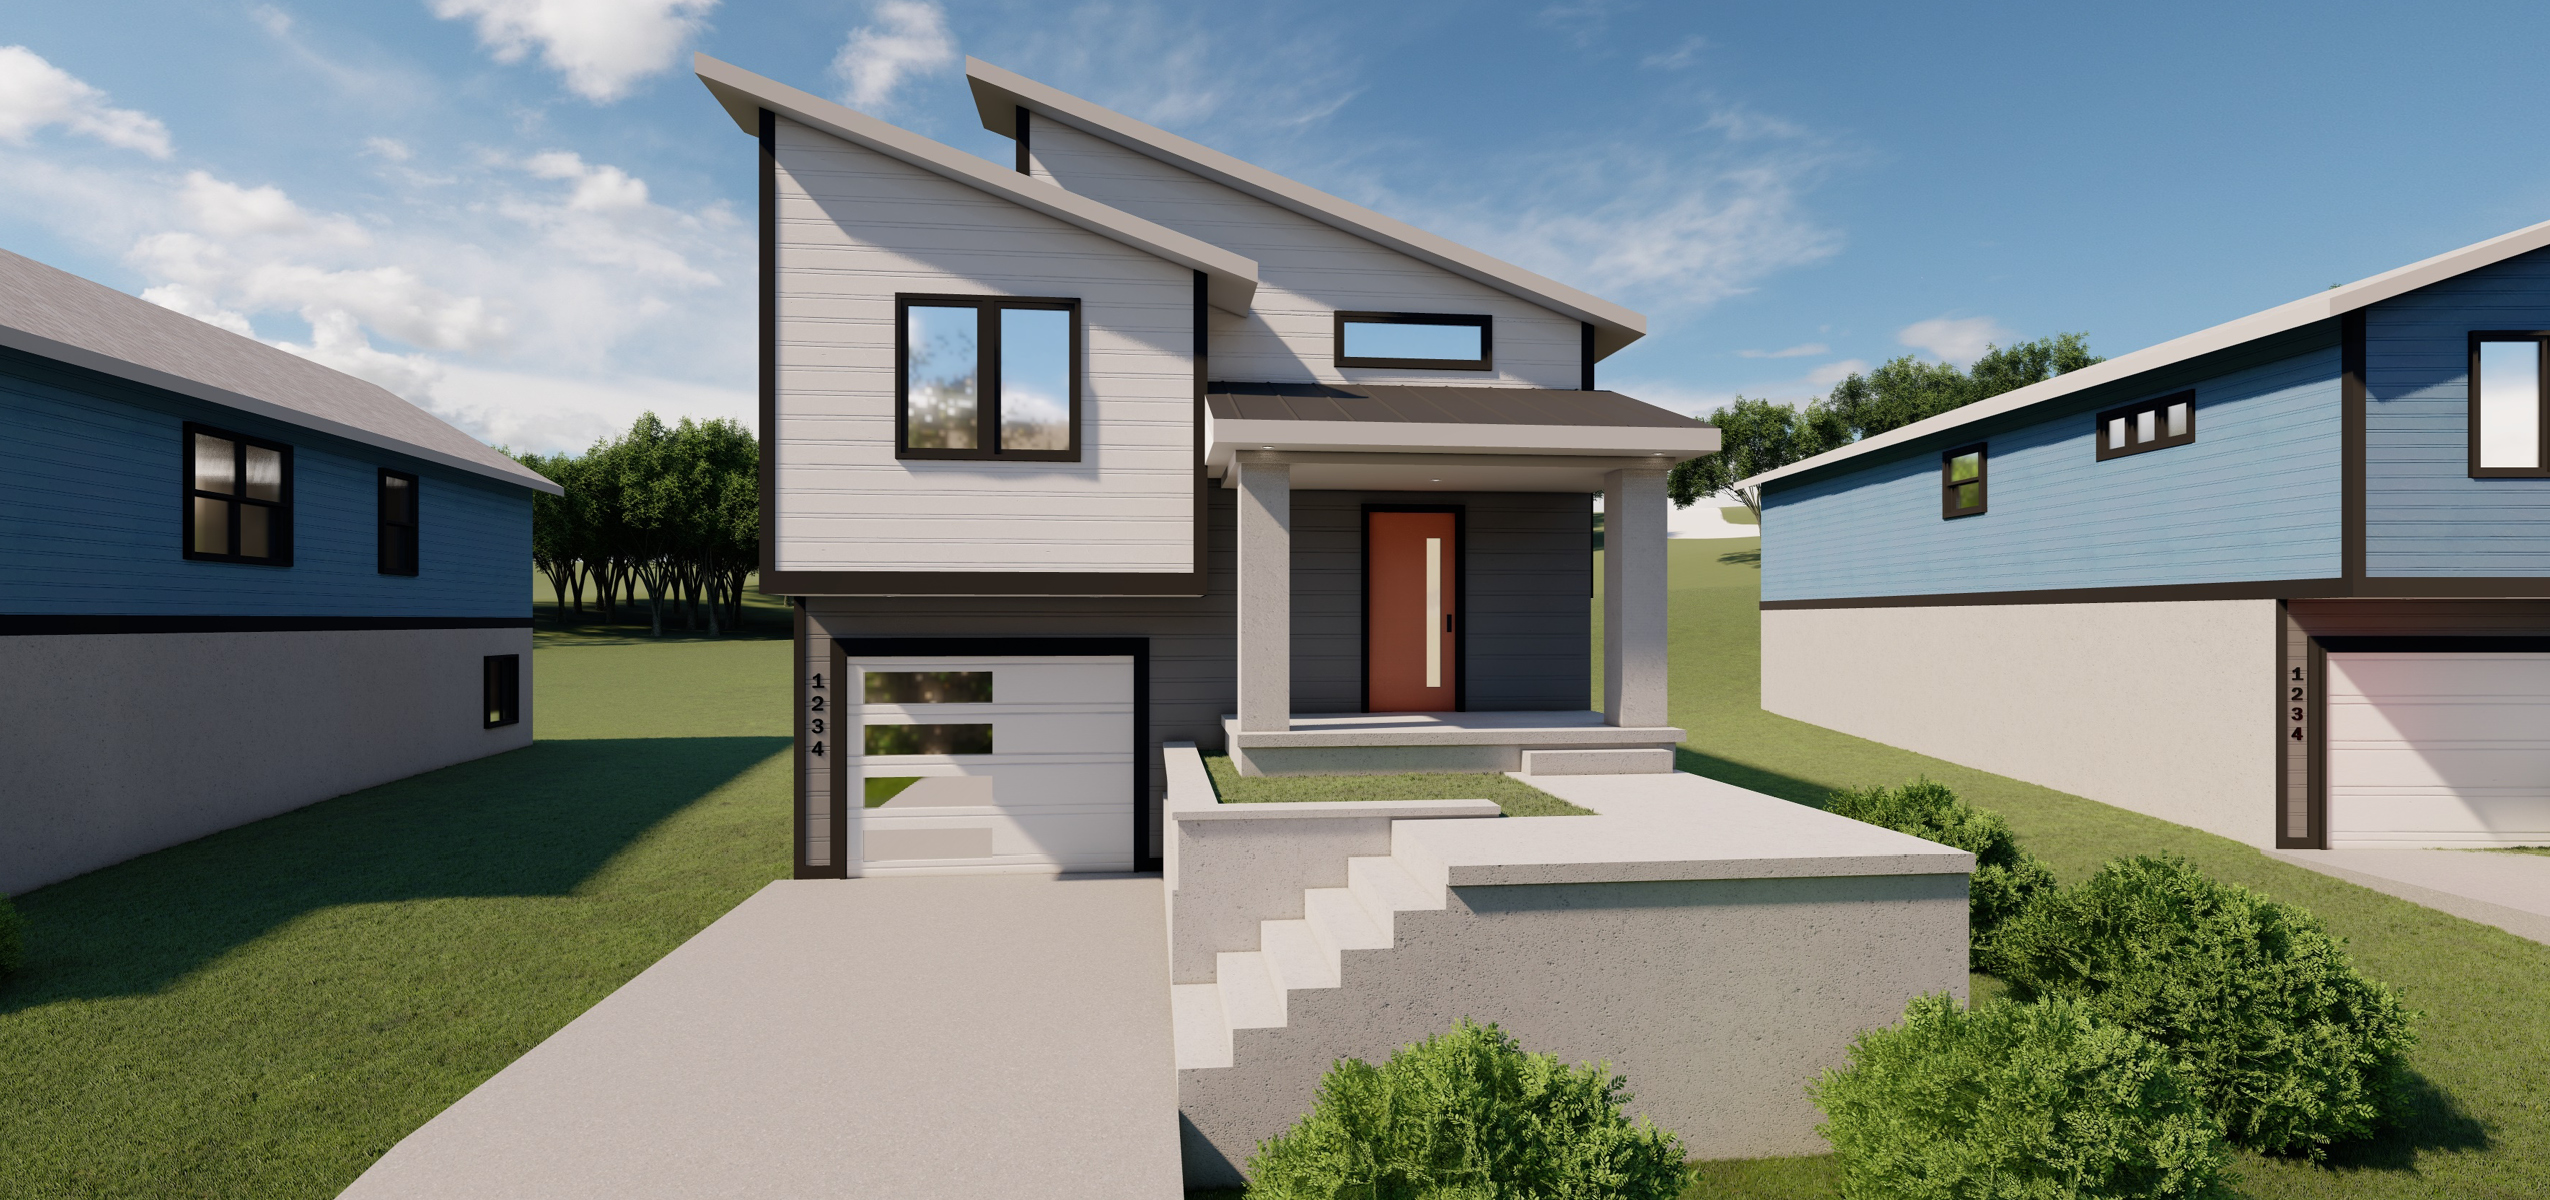 Rendering of a single family home for the new development.